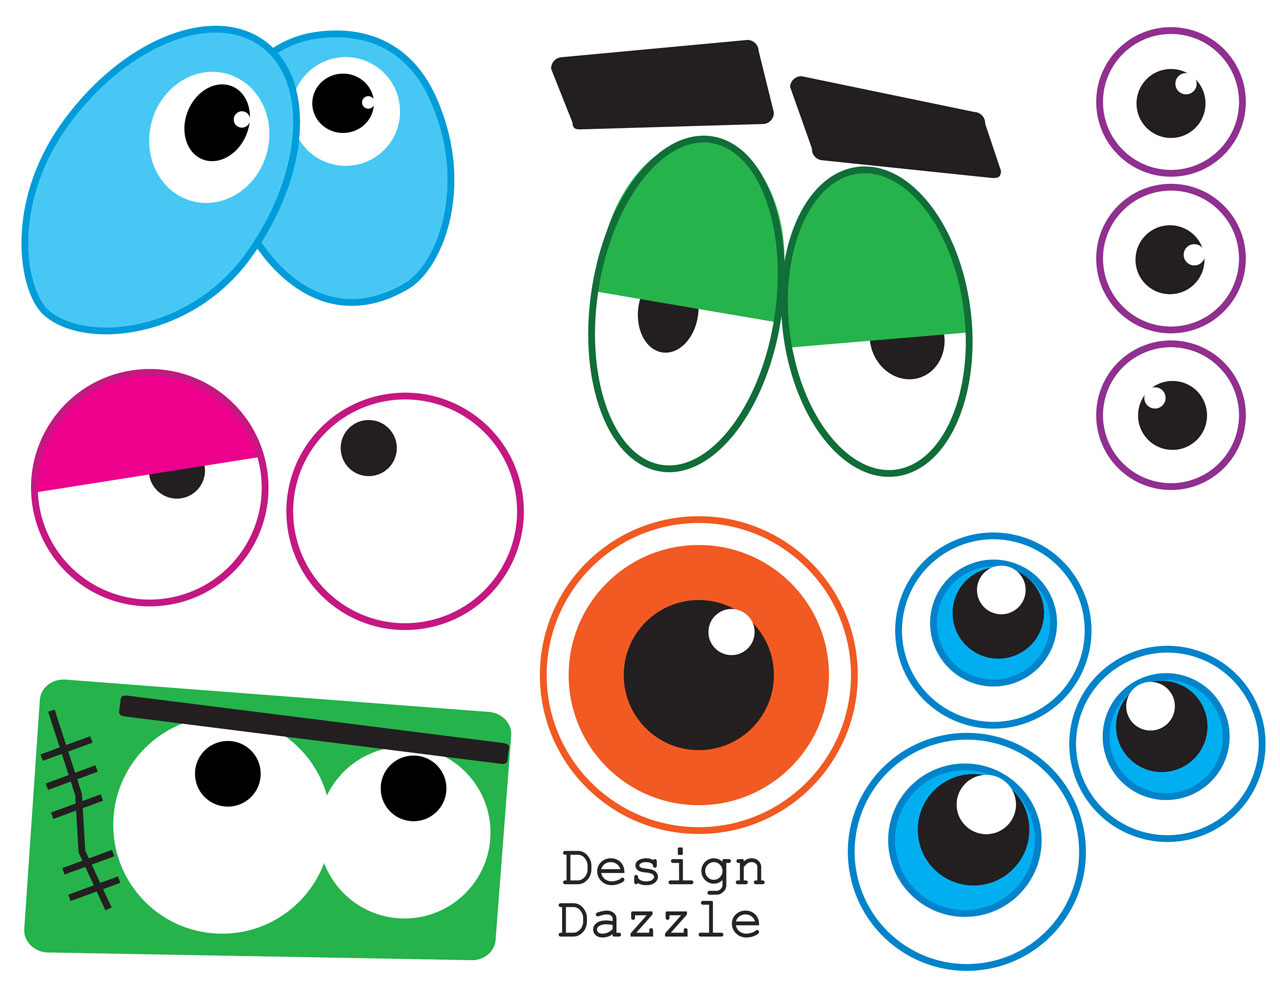 Free Monster Eyes Cliparts, Download Free Clip Art, Free